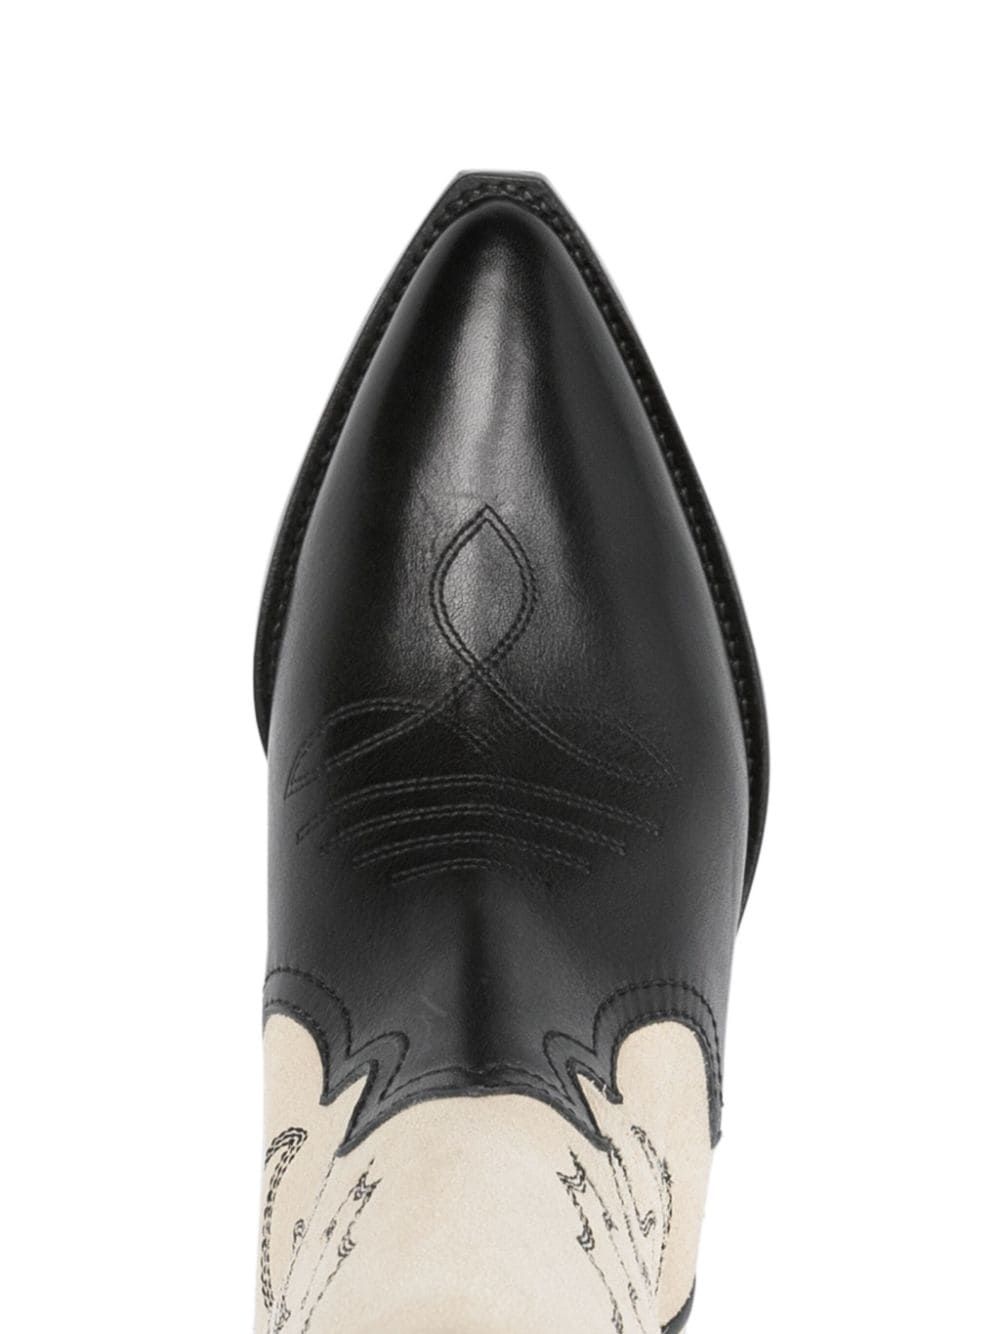 Black and White Leather Boots for Women